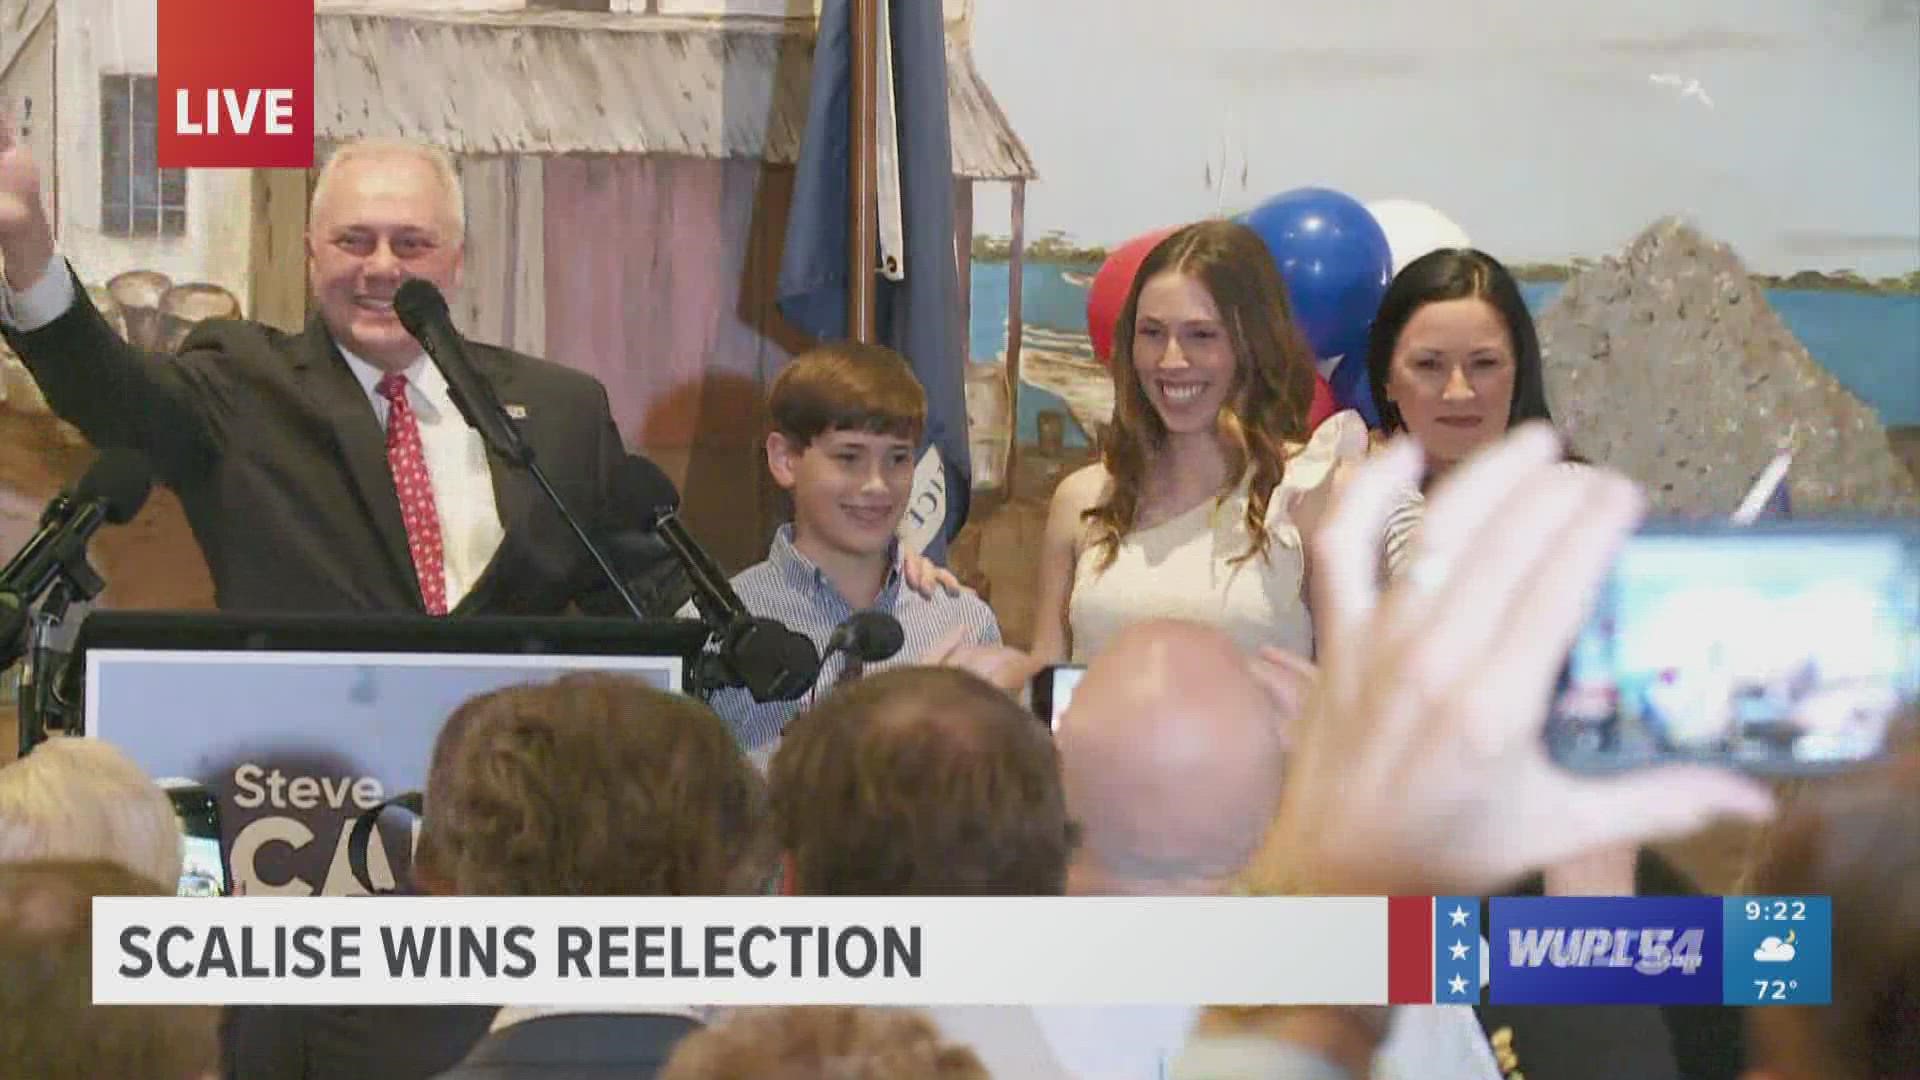 Steve Scalise (R) wins re-election to congress, setting himself up for a huge role in the House going forward.